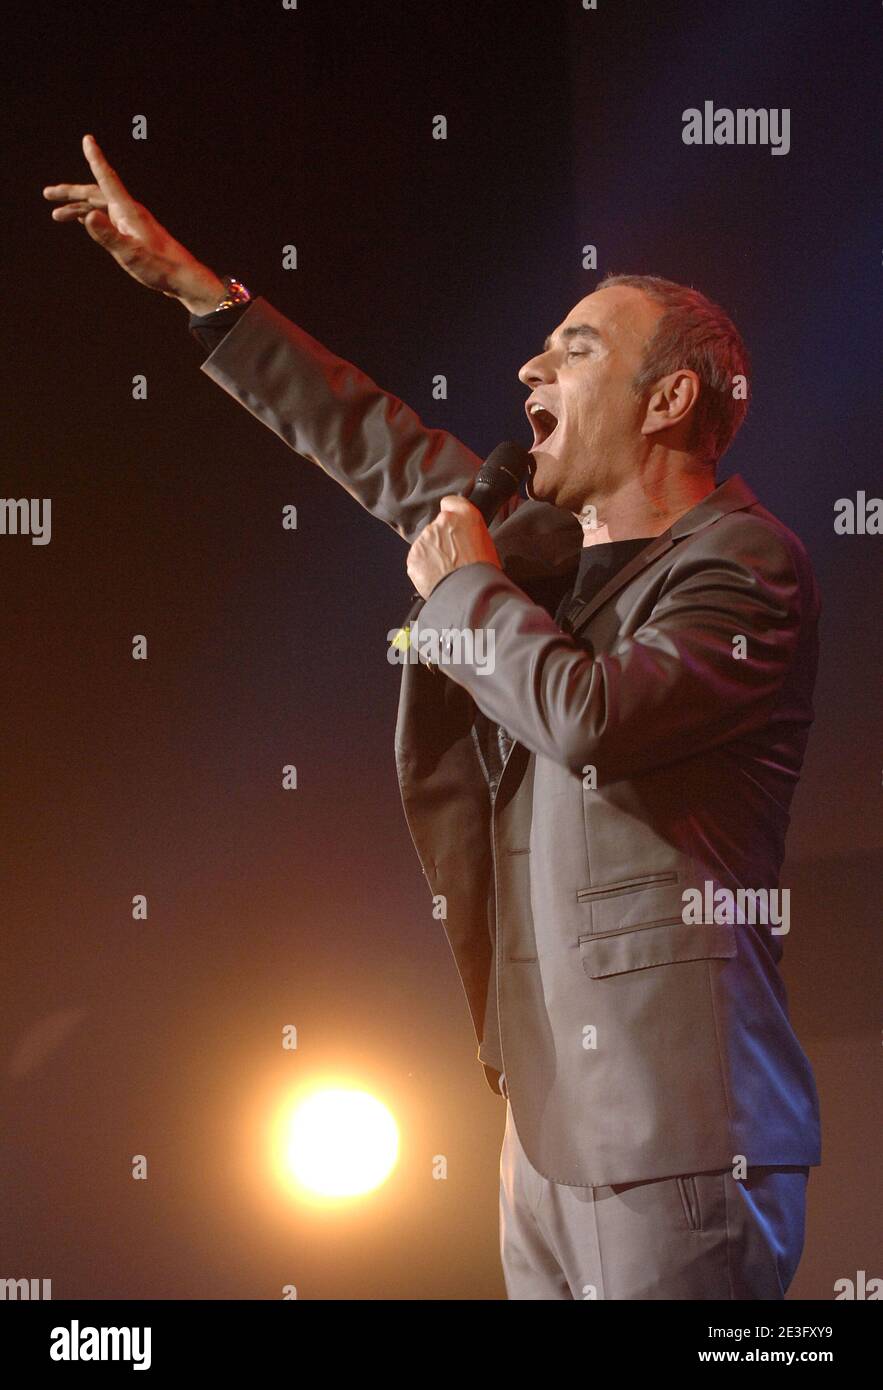 Jean-Pierre Mader performs live during RFM Party 80, at the Zenith in  Paris, France, on March 26, 2009. Photo by Giancarlo  Gorassini/ABACAPRESS.COM Stock Photo - Alamy